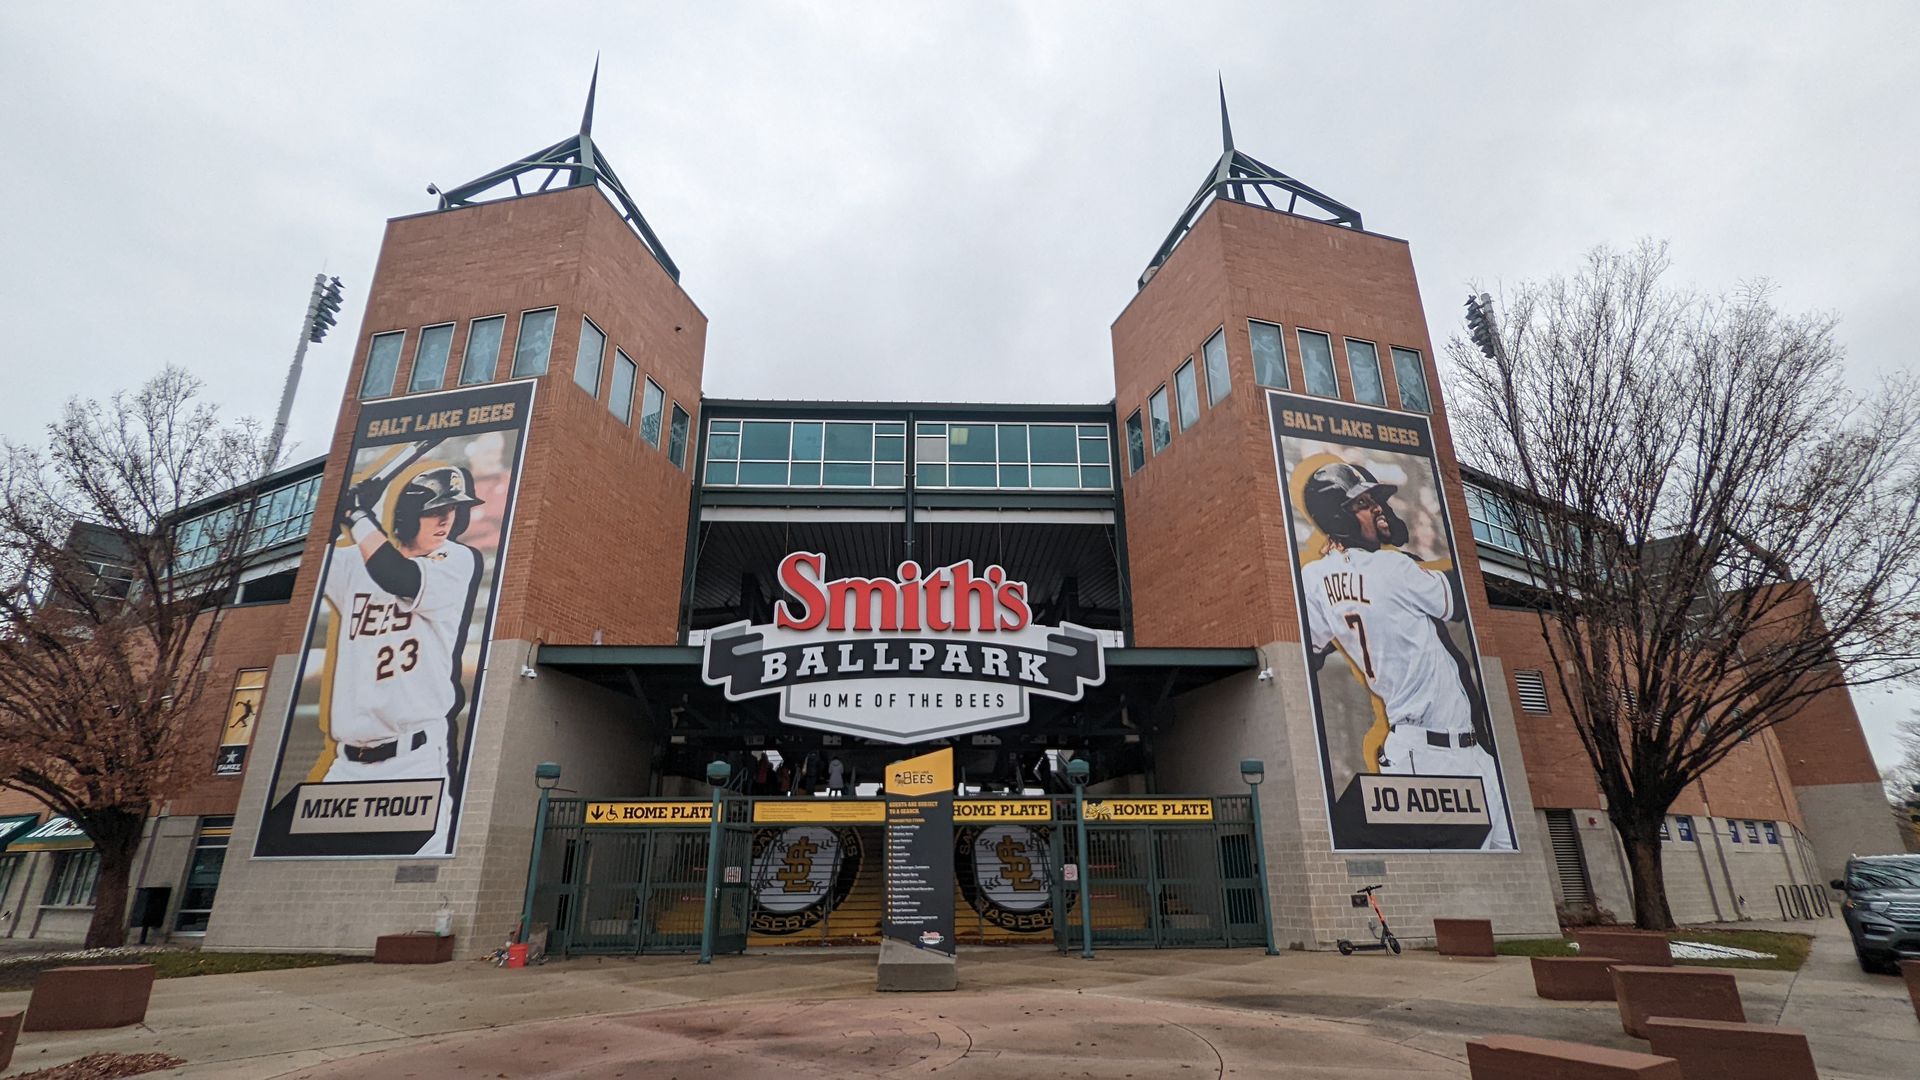 Towers at the entrance of a baseball stadium bookend a sign that reads "Smith's Ballpark."